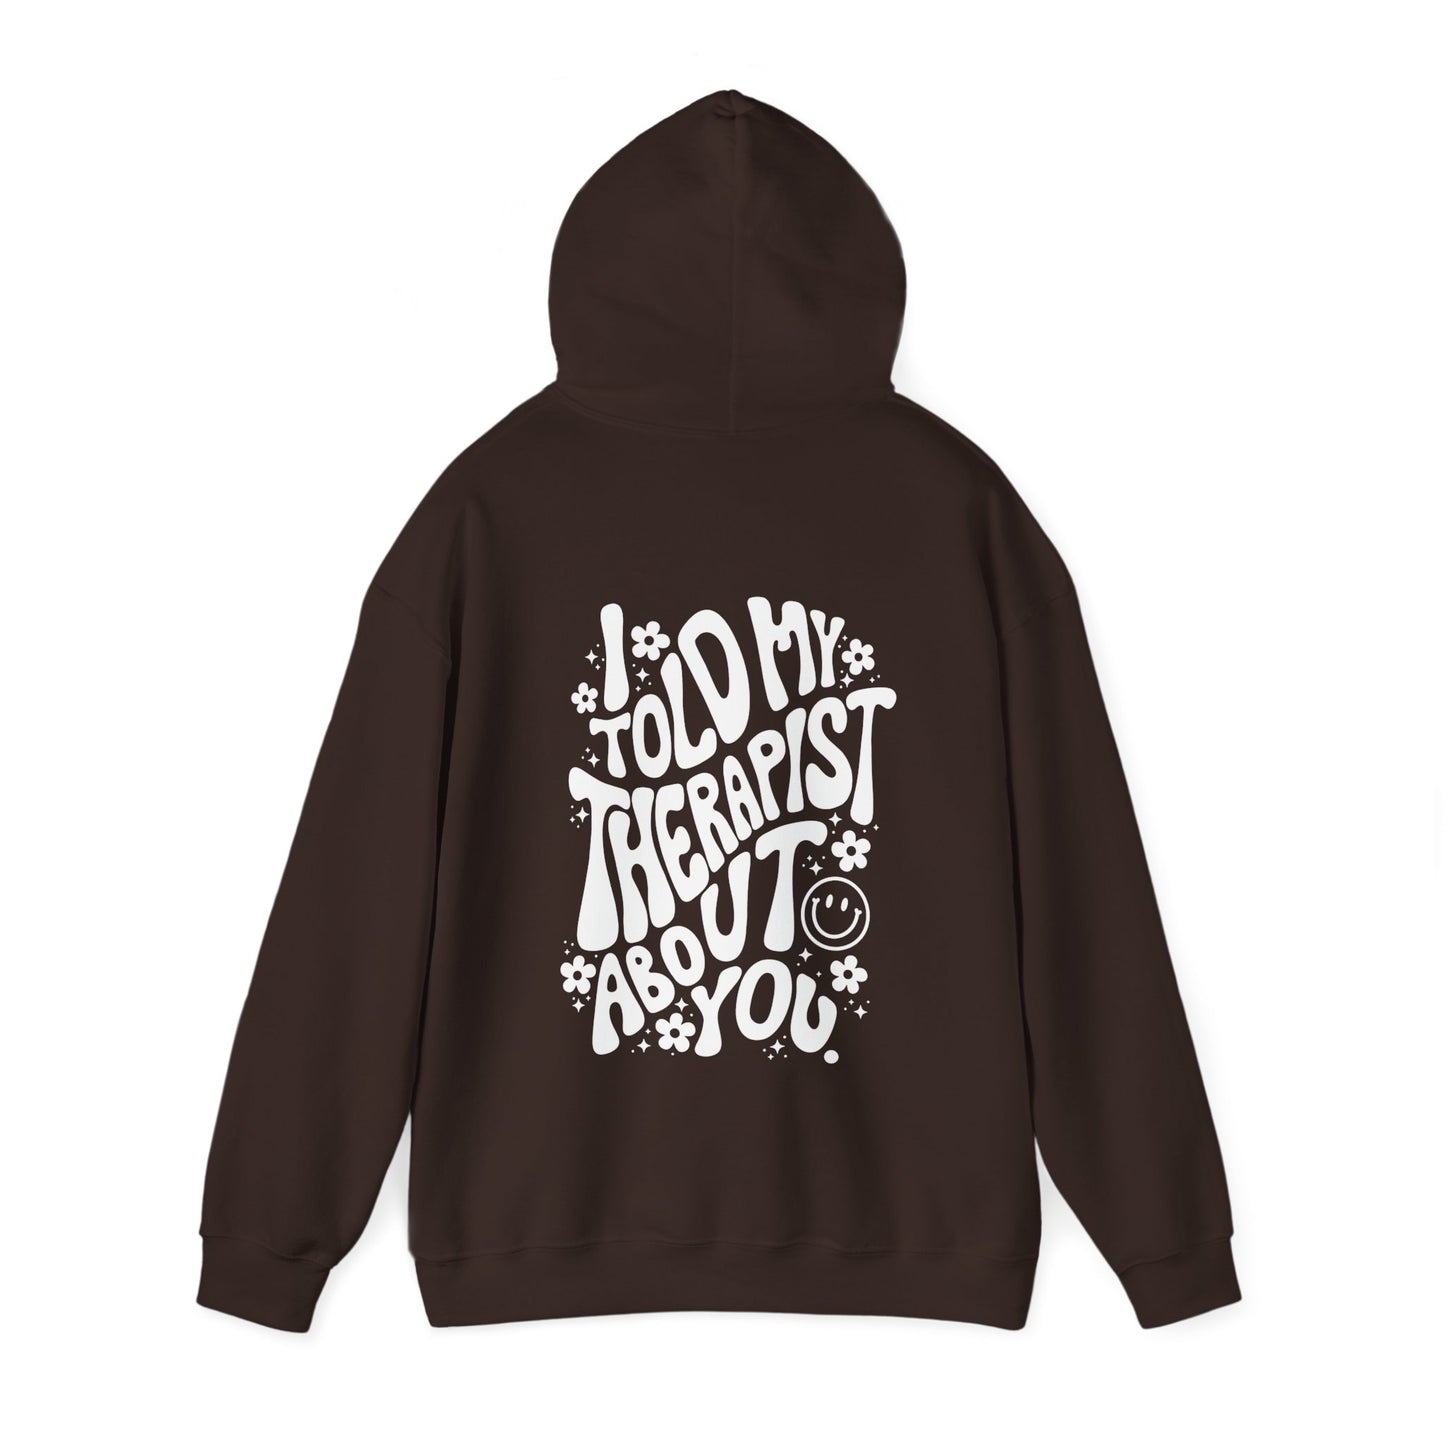 Told My Therapist About You Hooded Sweatshirt